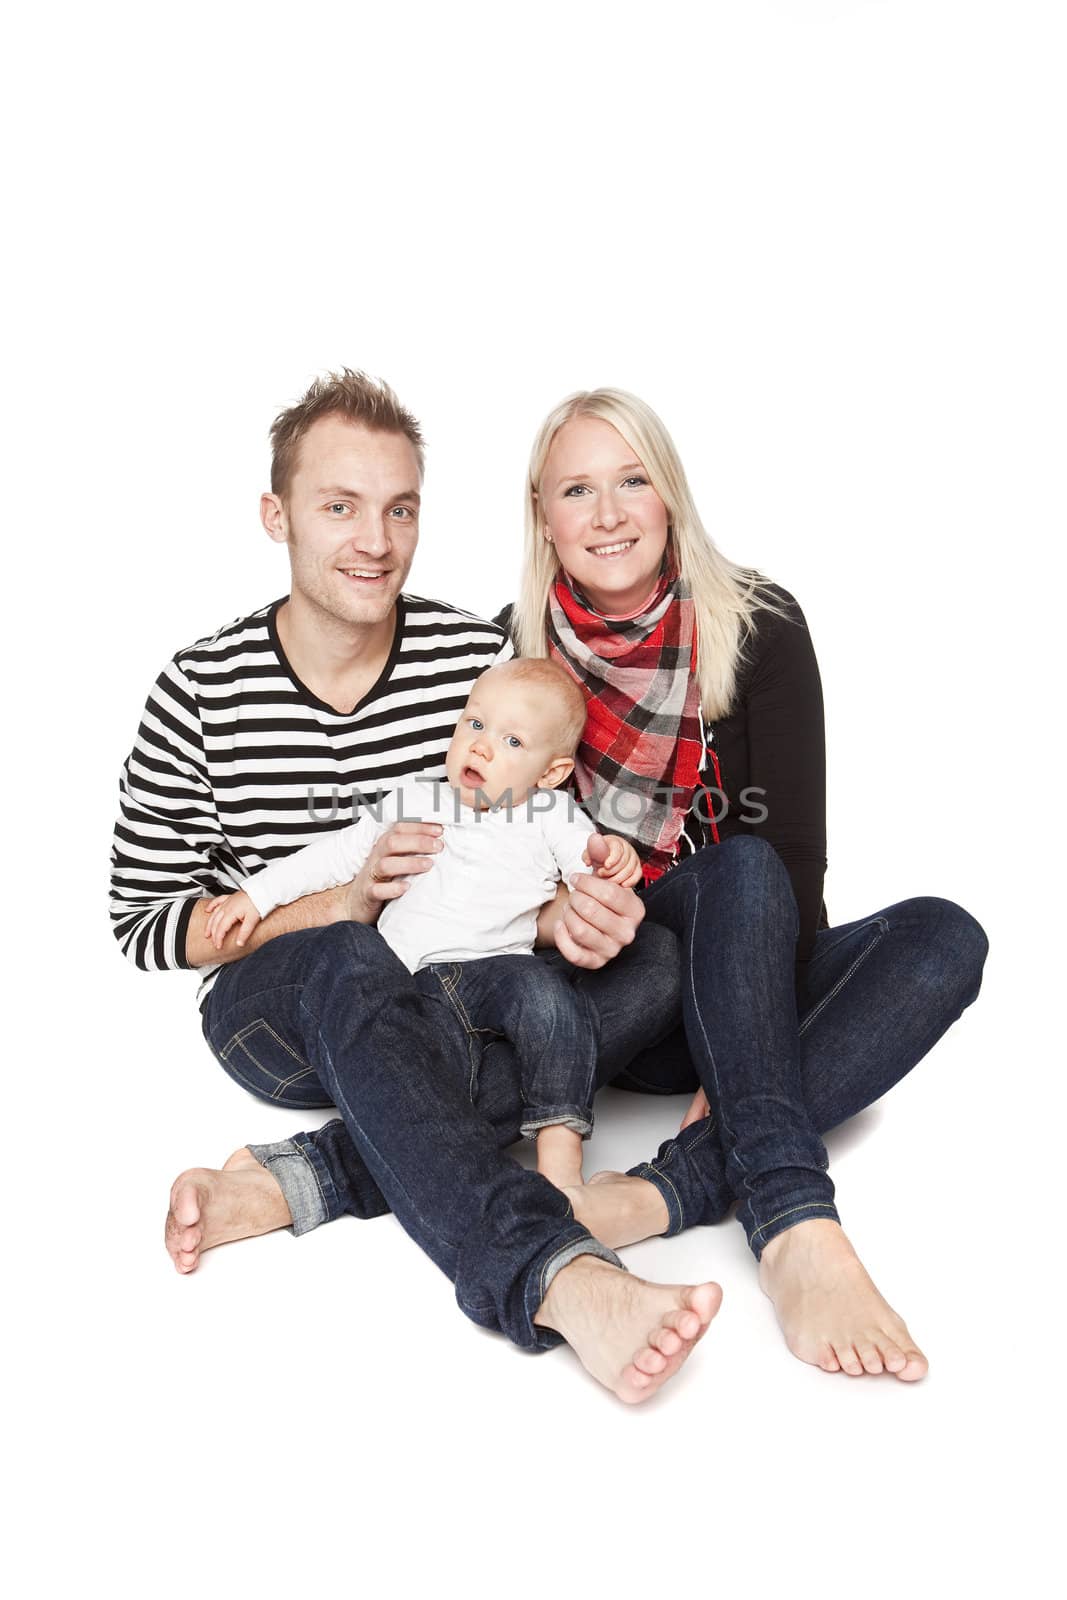 Happy family portrait isolated against a white background